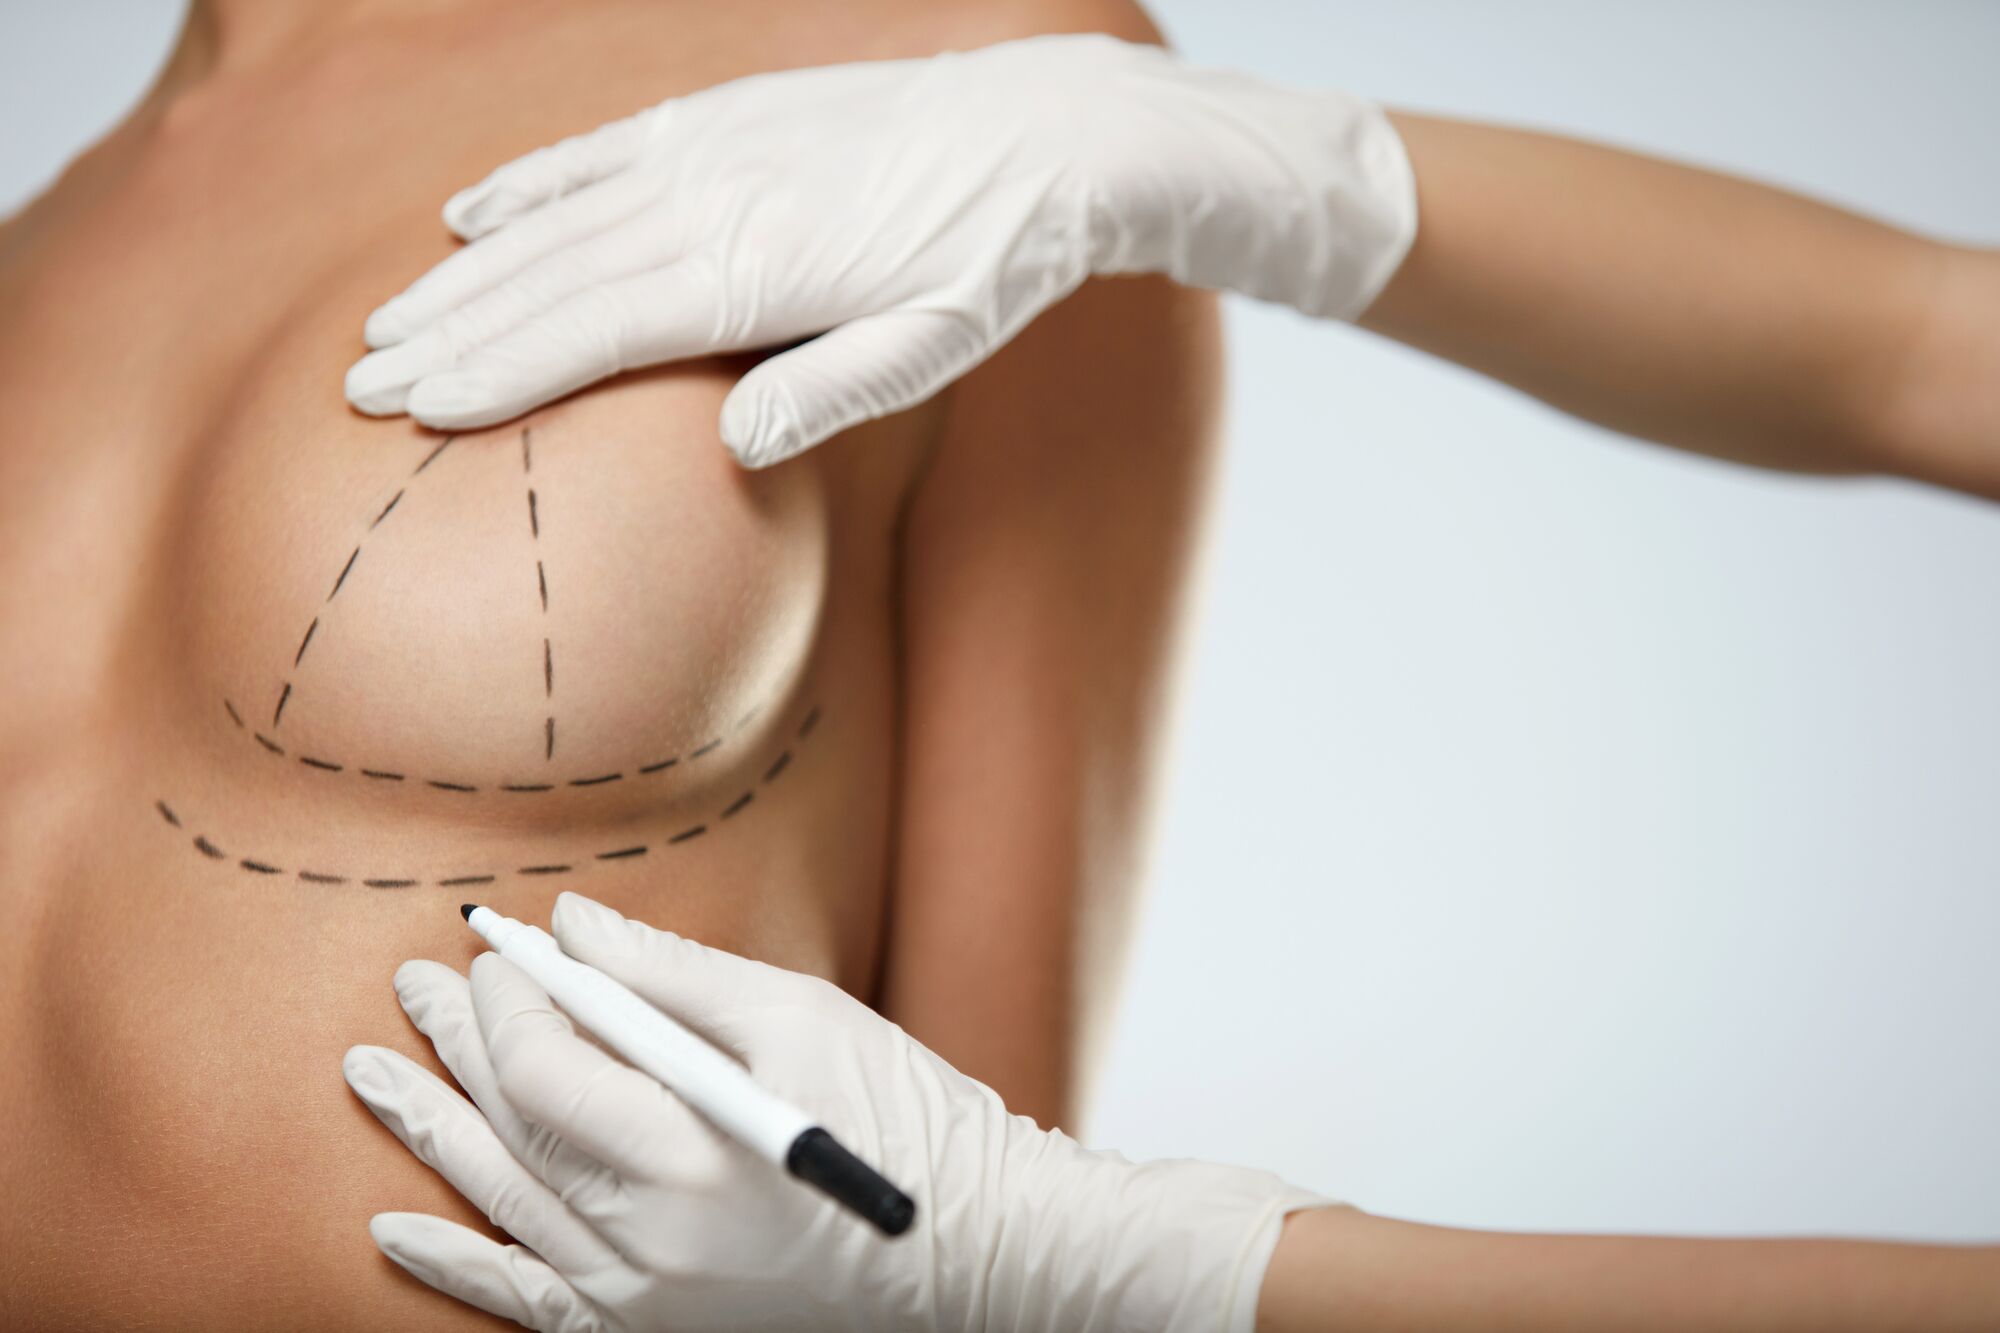 Interested in Breast Augmentation Without the Scars? We've Got You Covered  - Dr. Pancholi